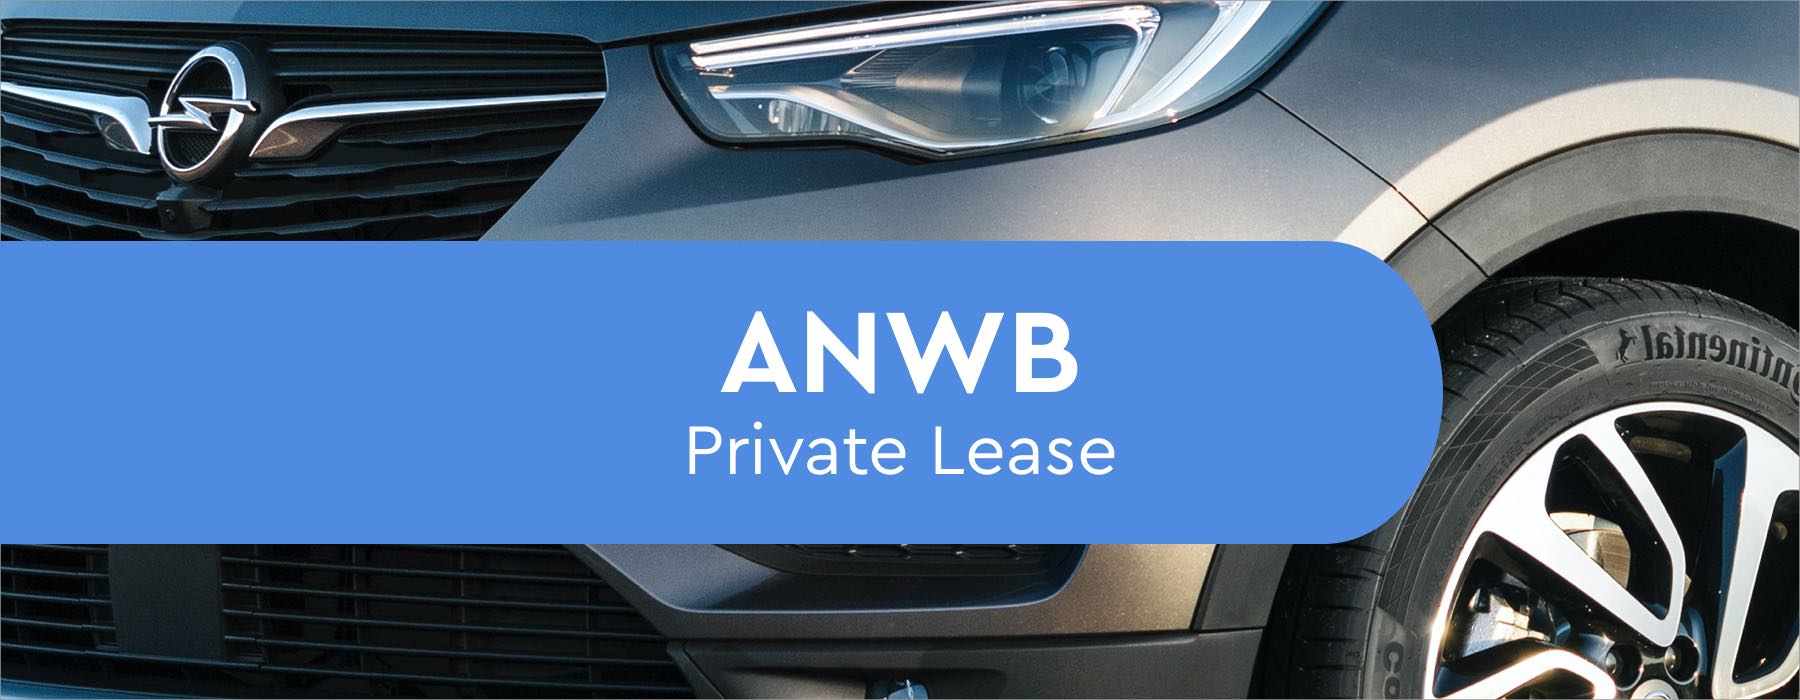 anwb Private Lease